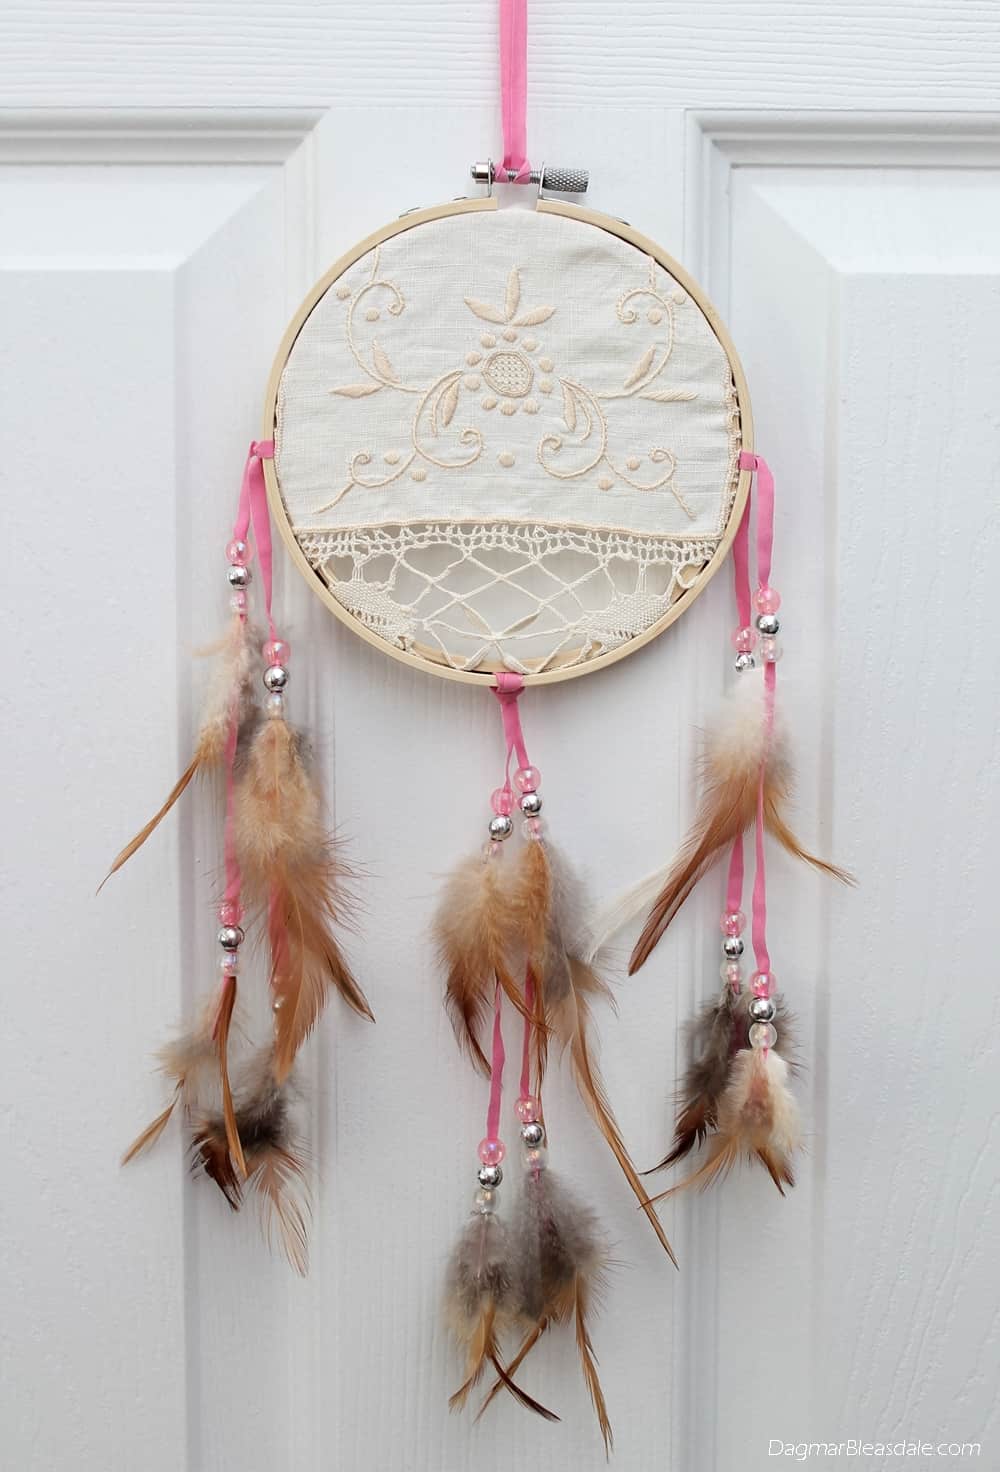 DIY dreamcatcher with lace, embroidry hoop, and ribbons,